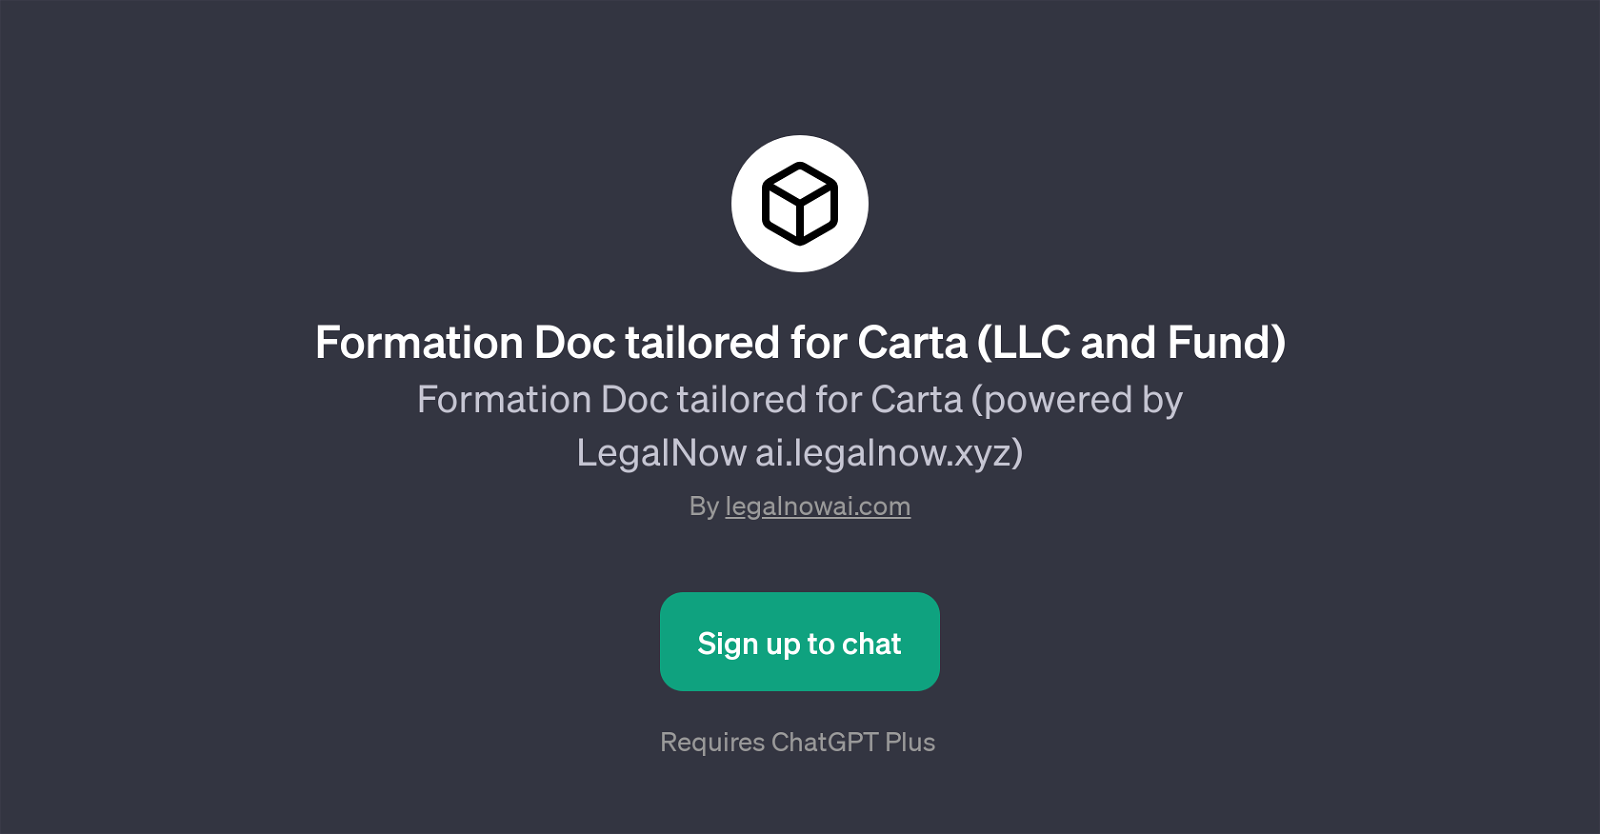 Formation Doc tailored for Carta (LLC and Fund) website